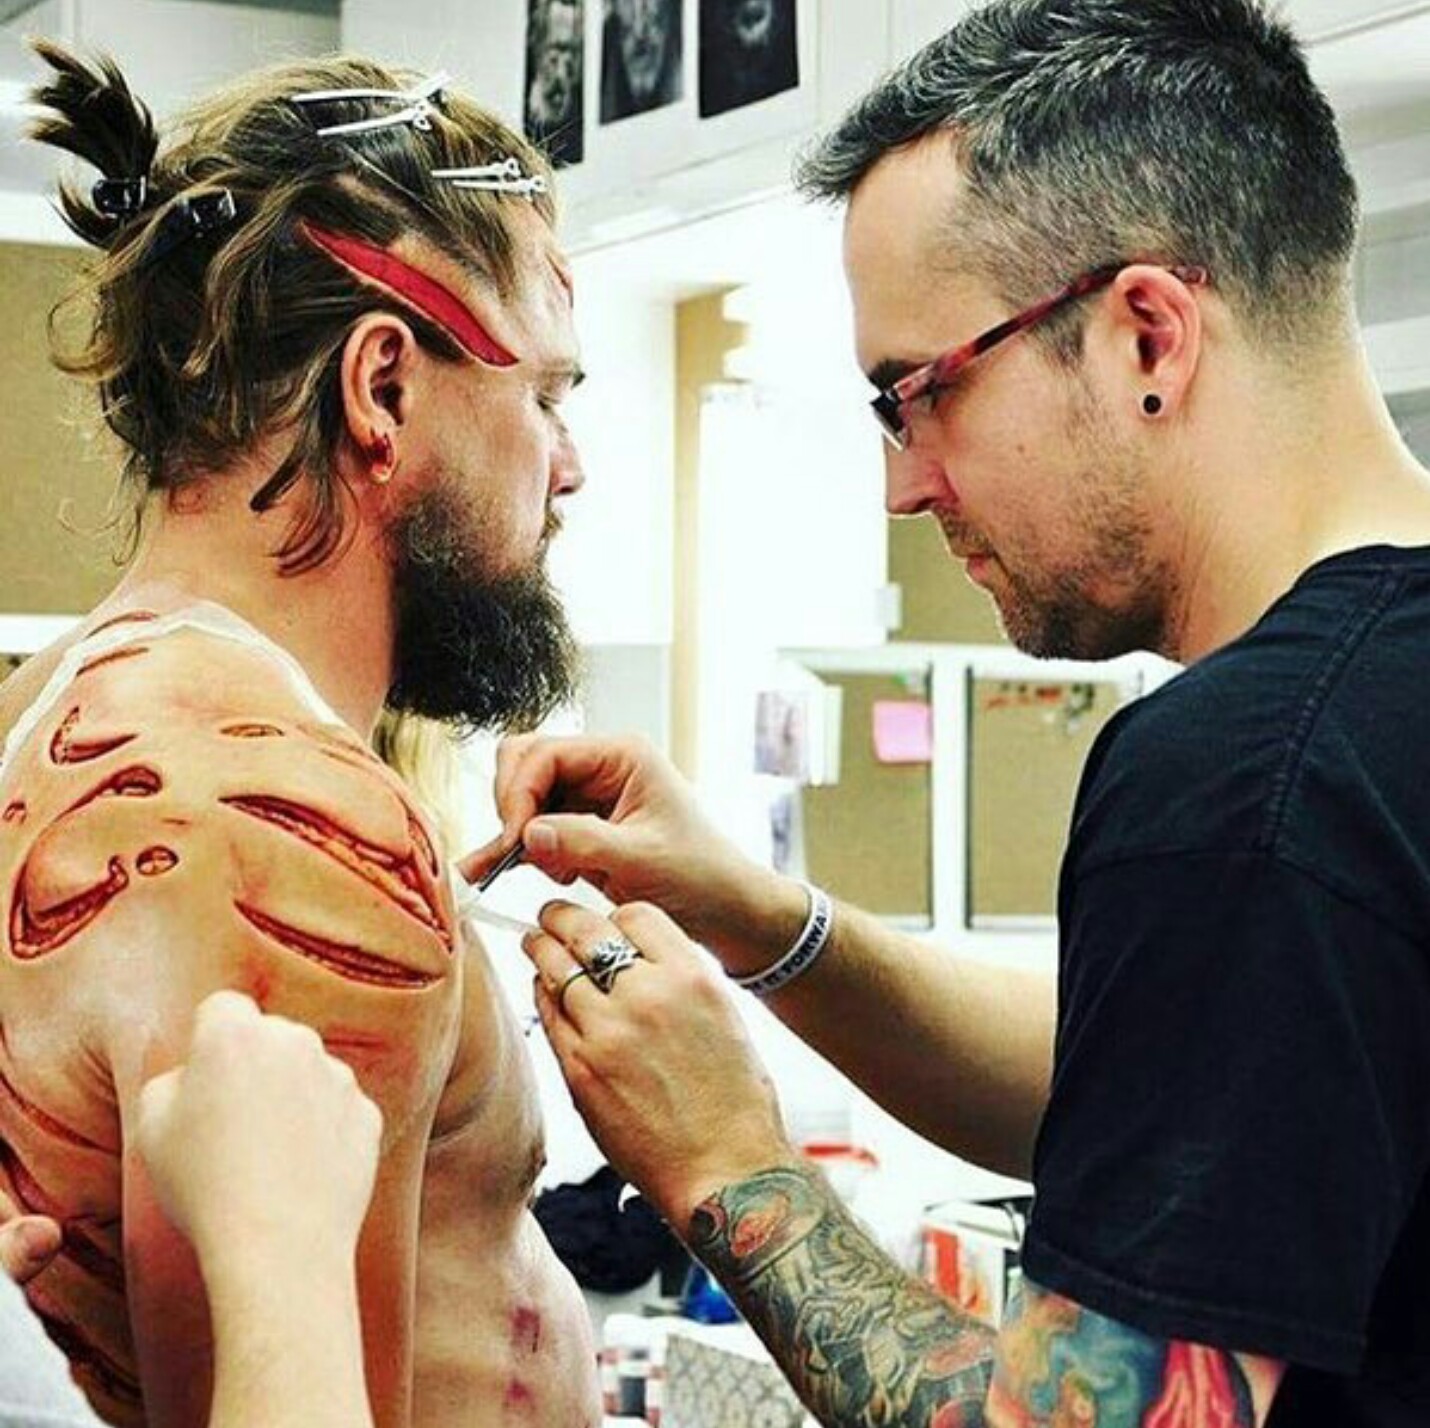 Leonardo DiCaprio getting prosthetic wounds and makeup applied during the filming of The Revenant.